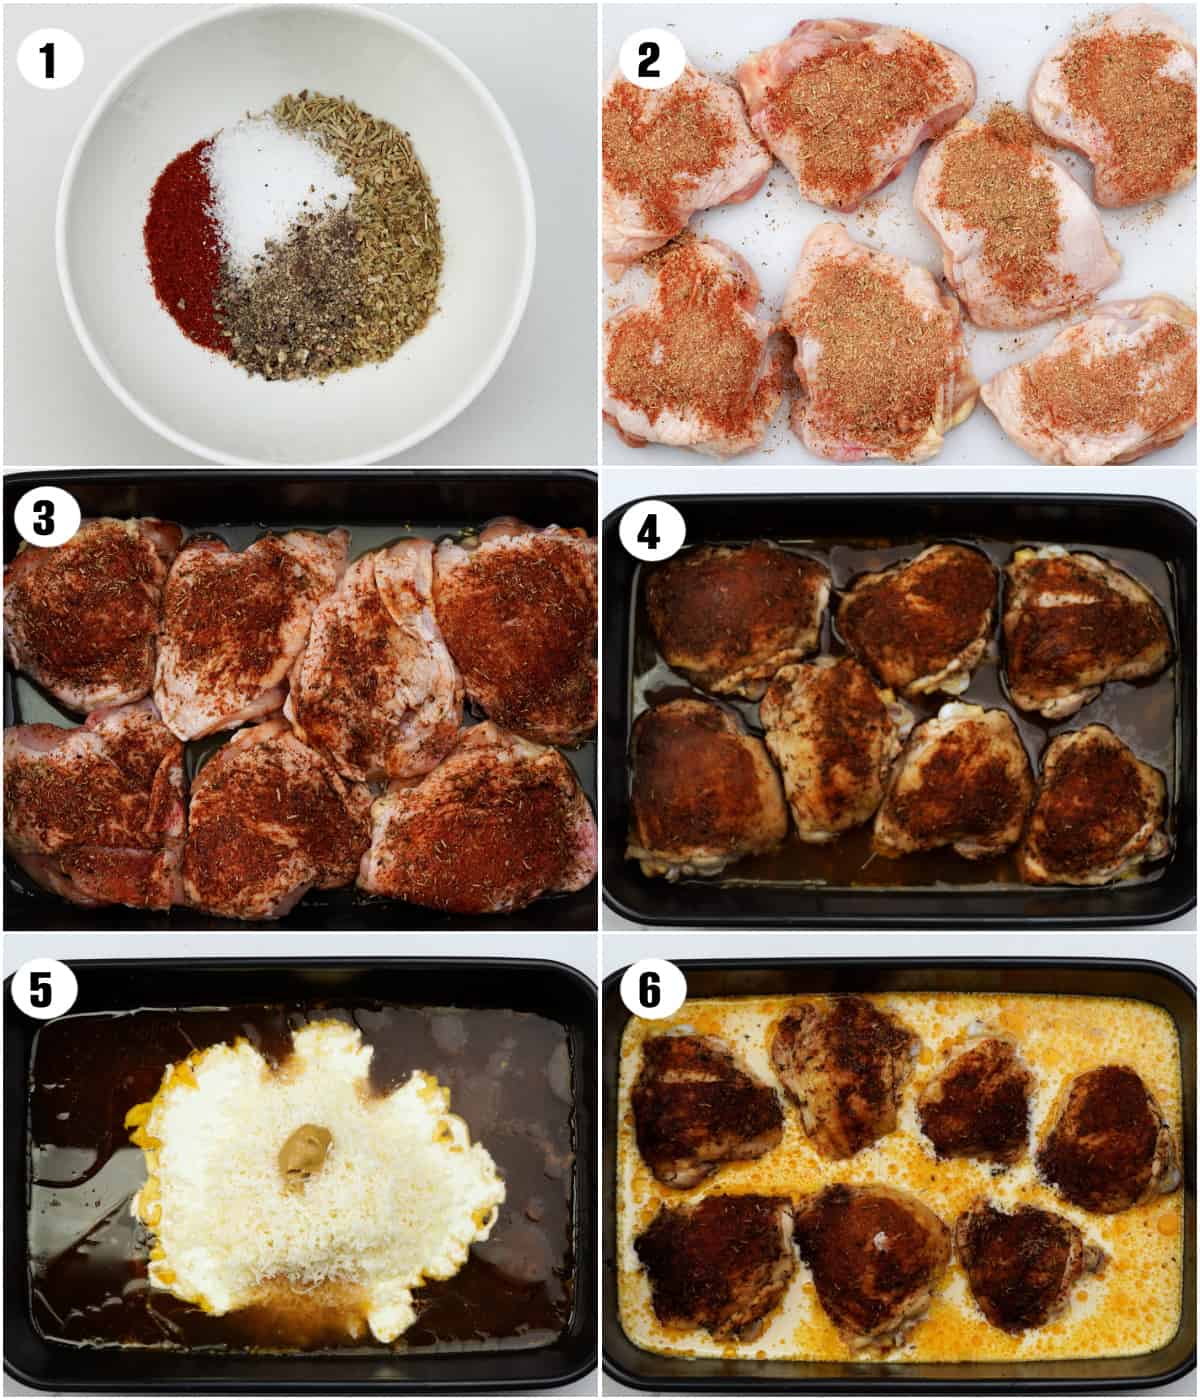 Easy steps to make baked chicken thighs with creamy parmesan sauce.